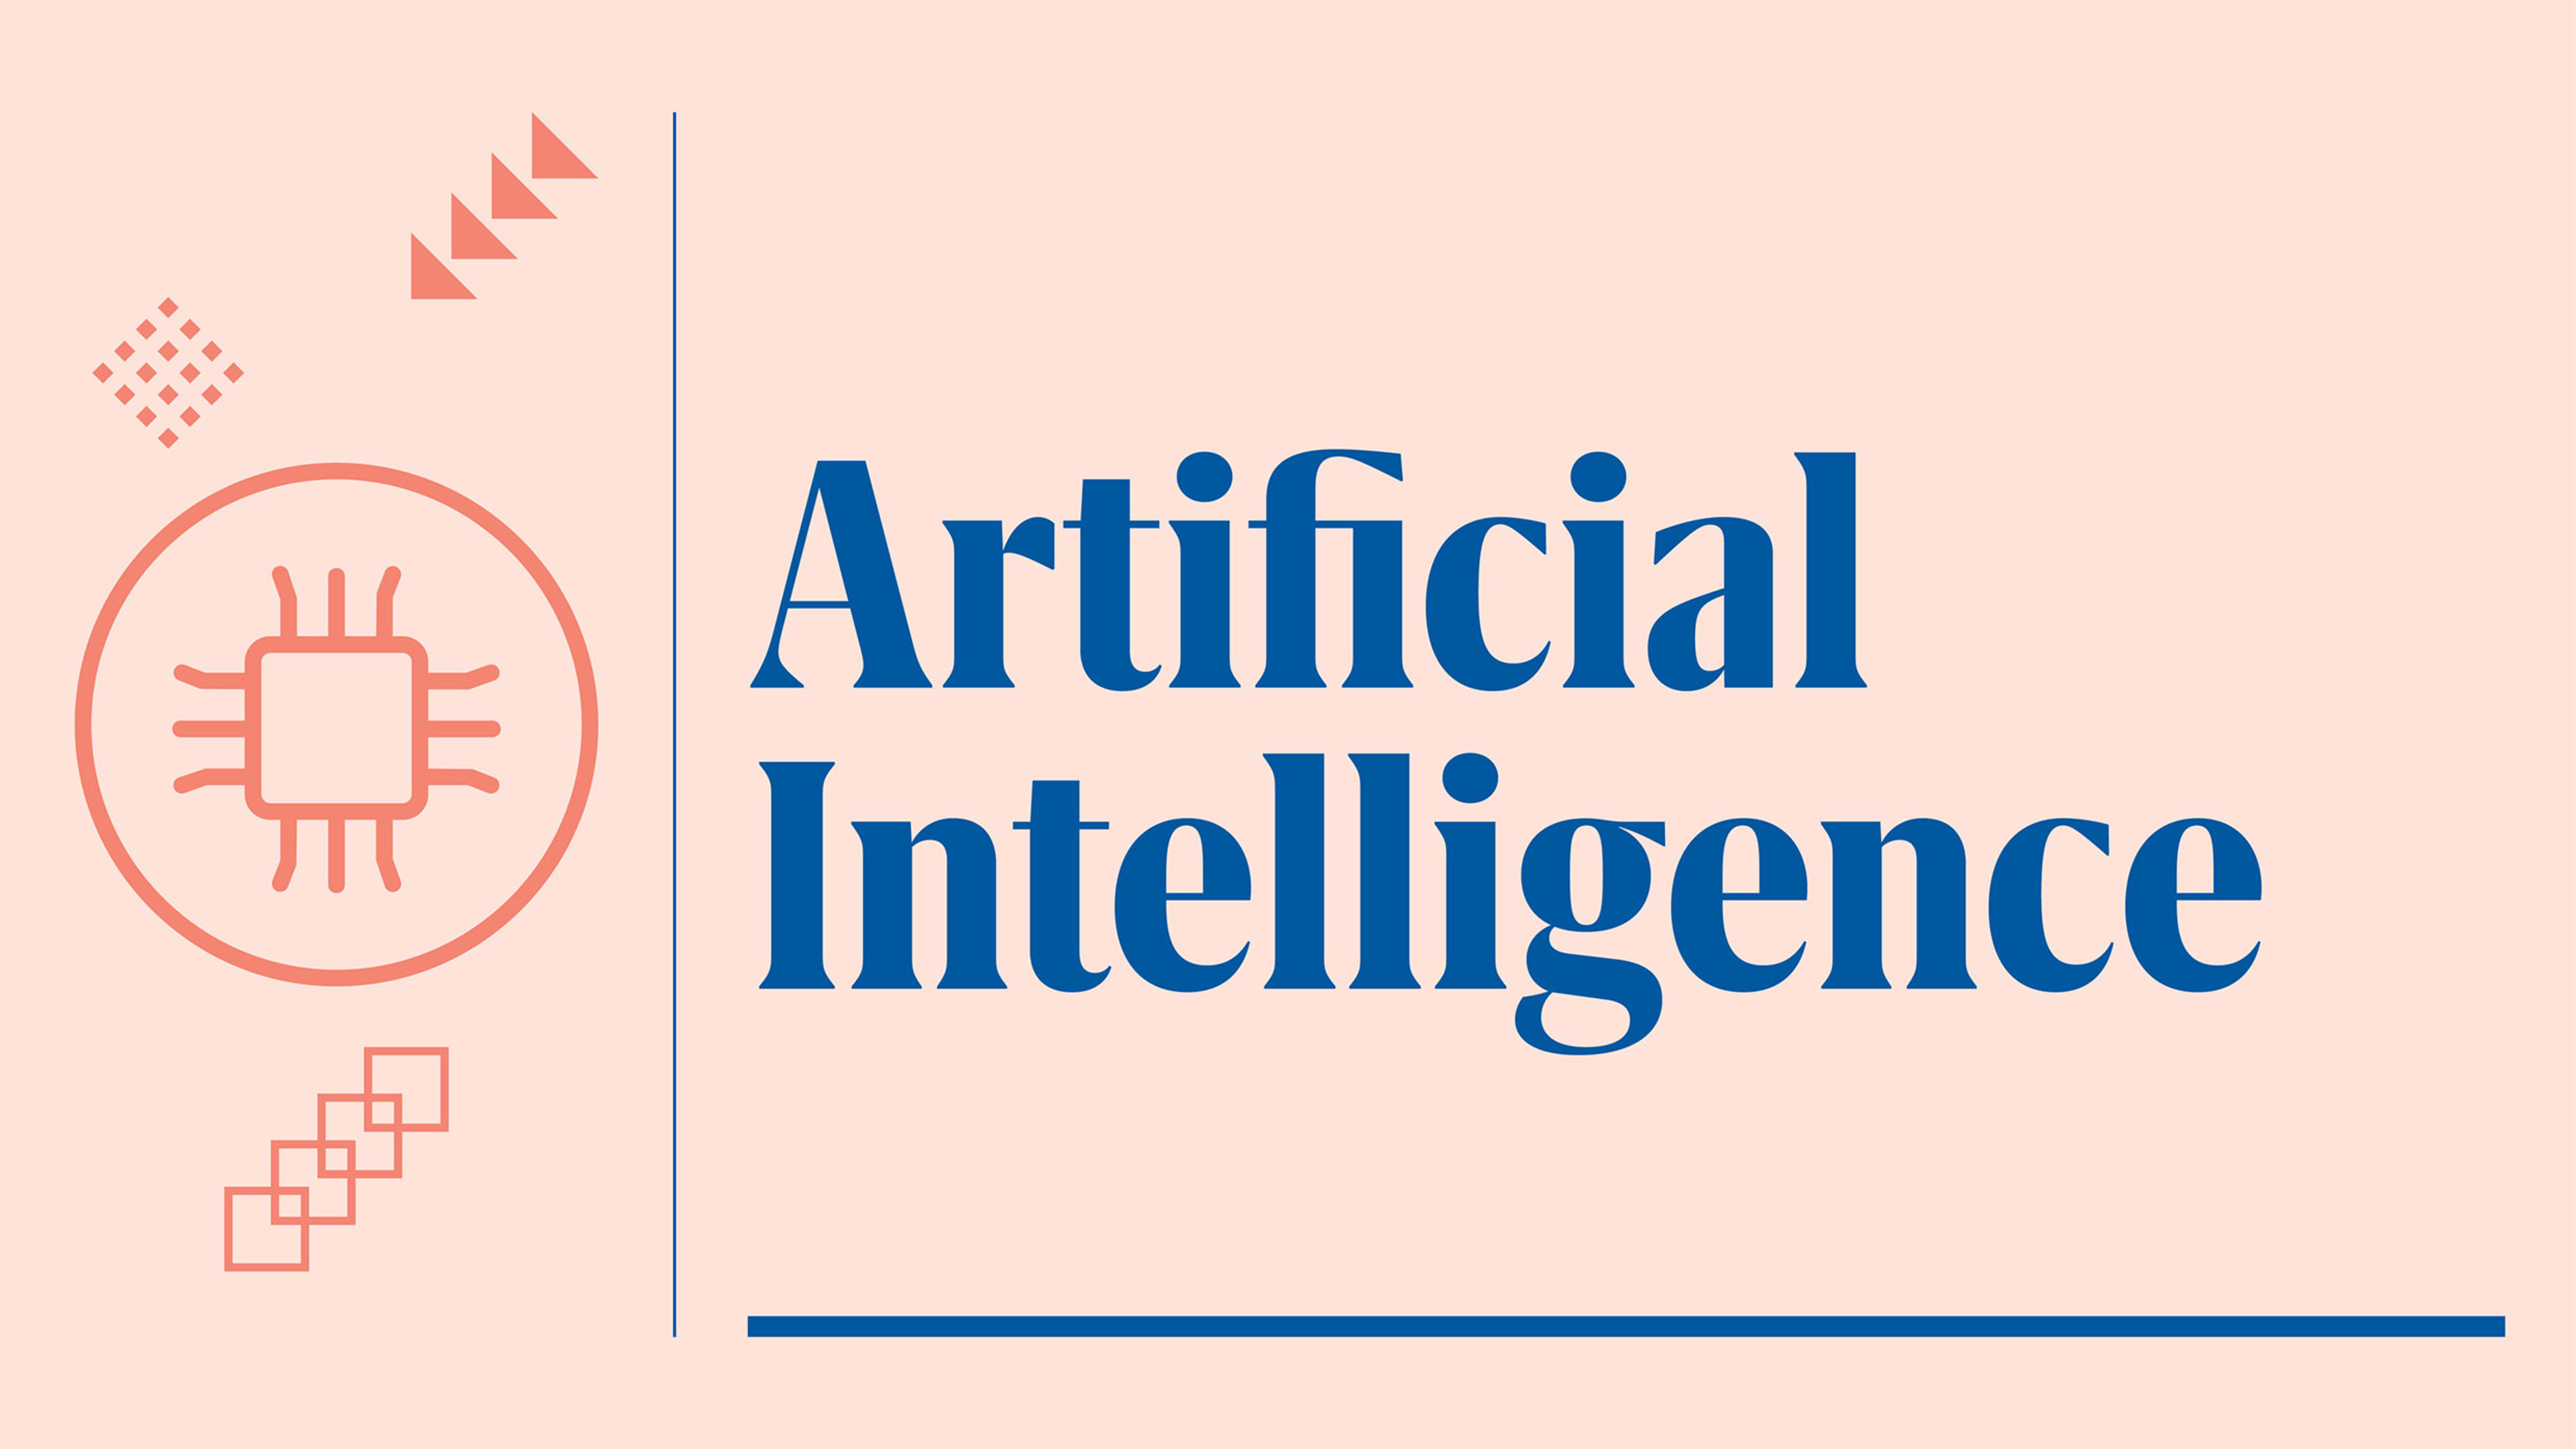 The 10 most innovative artificial intelligence companies of 2020